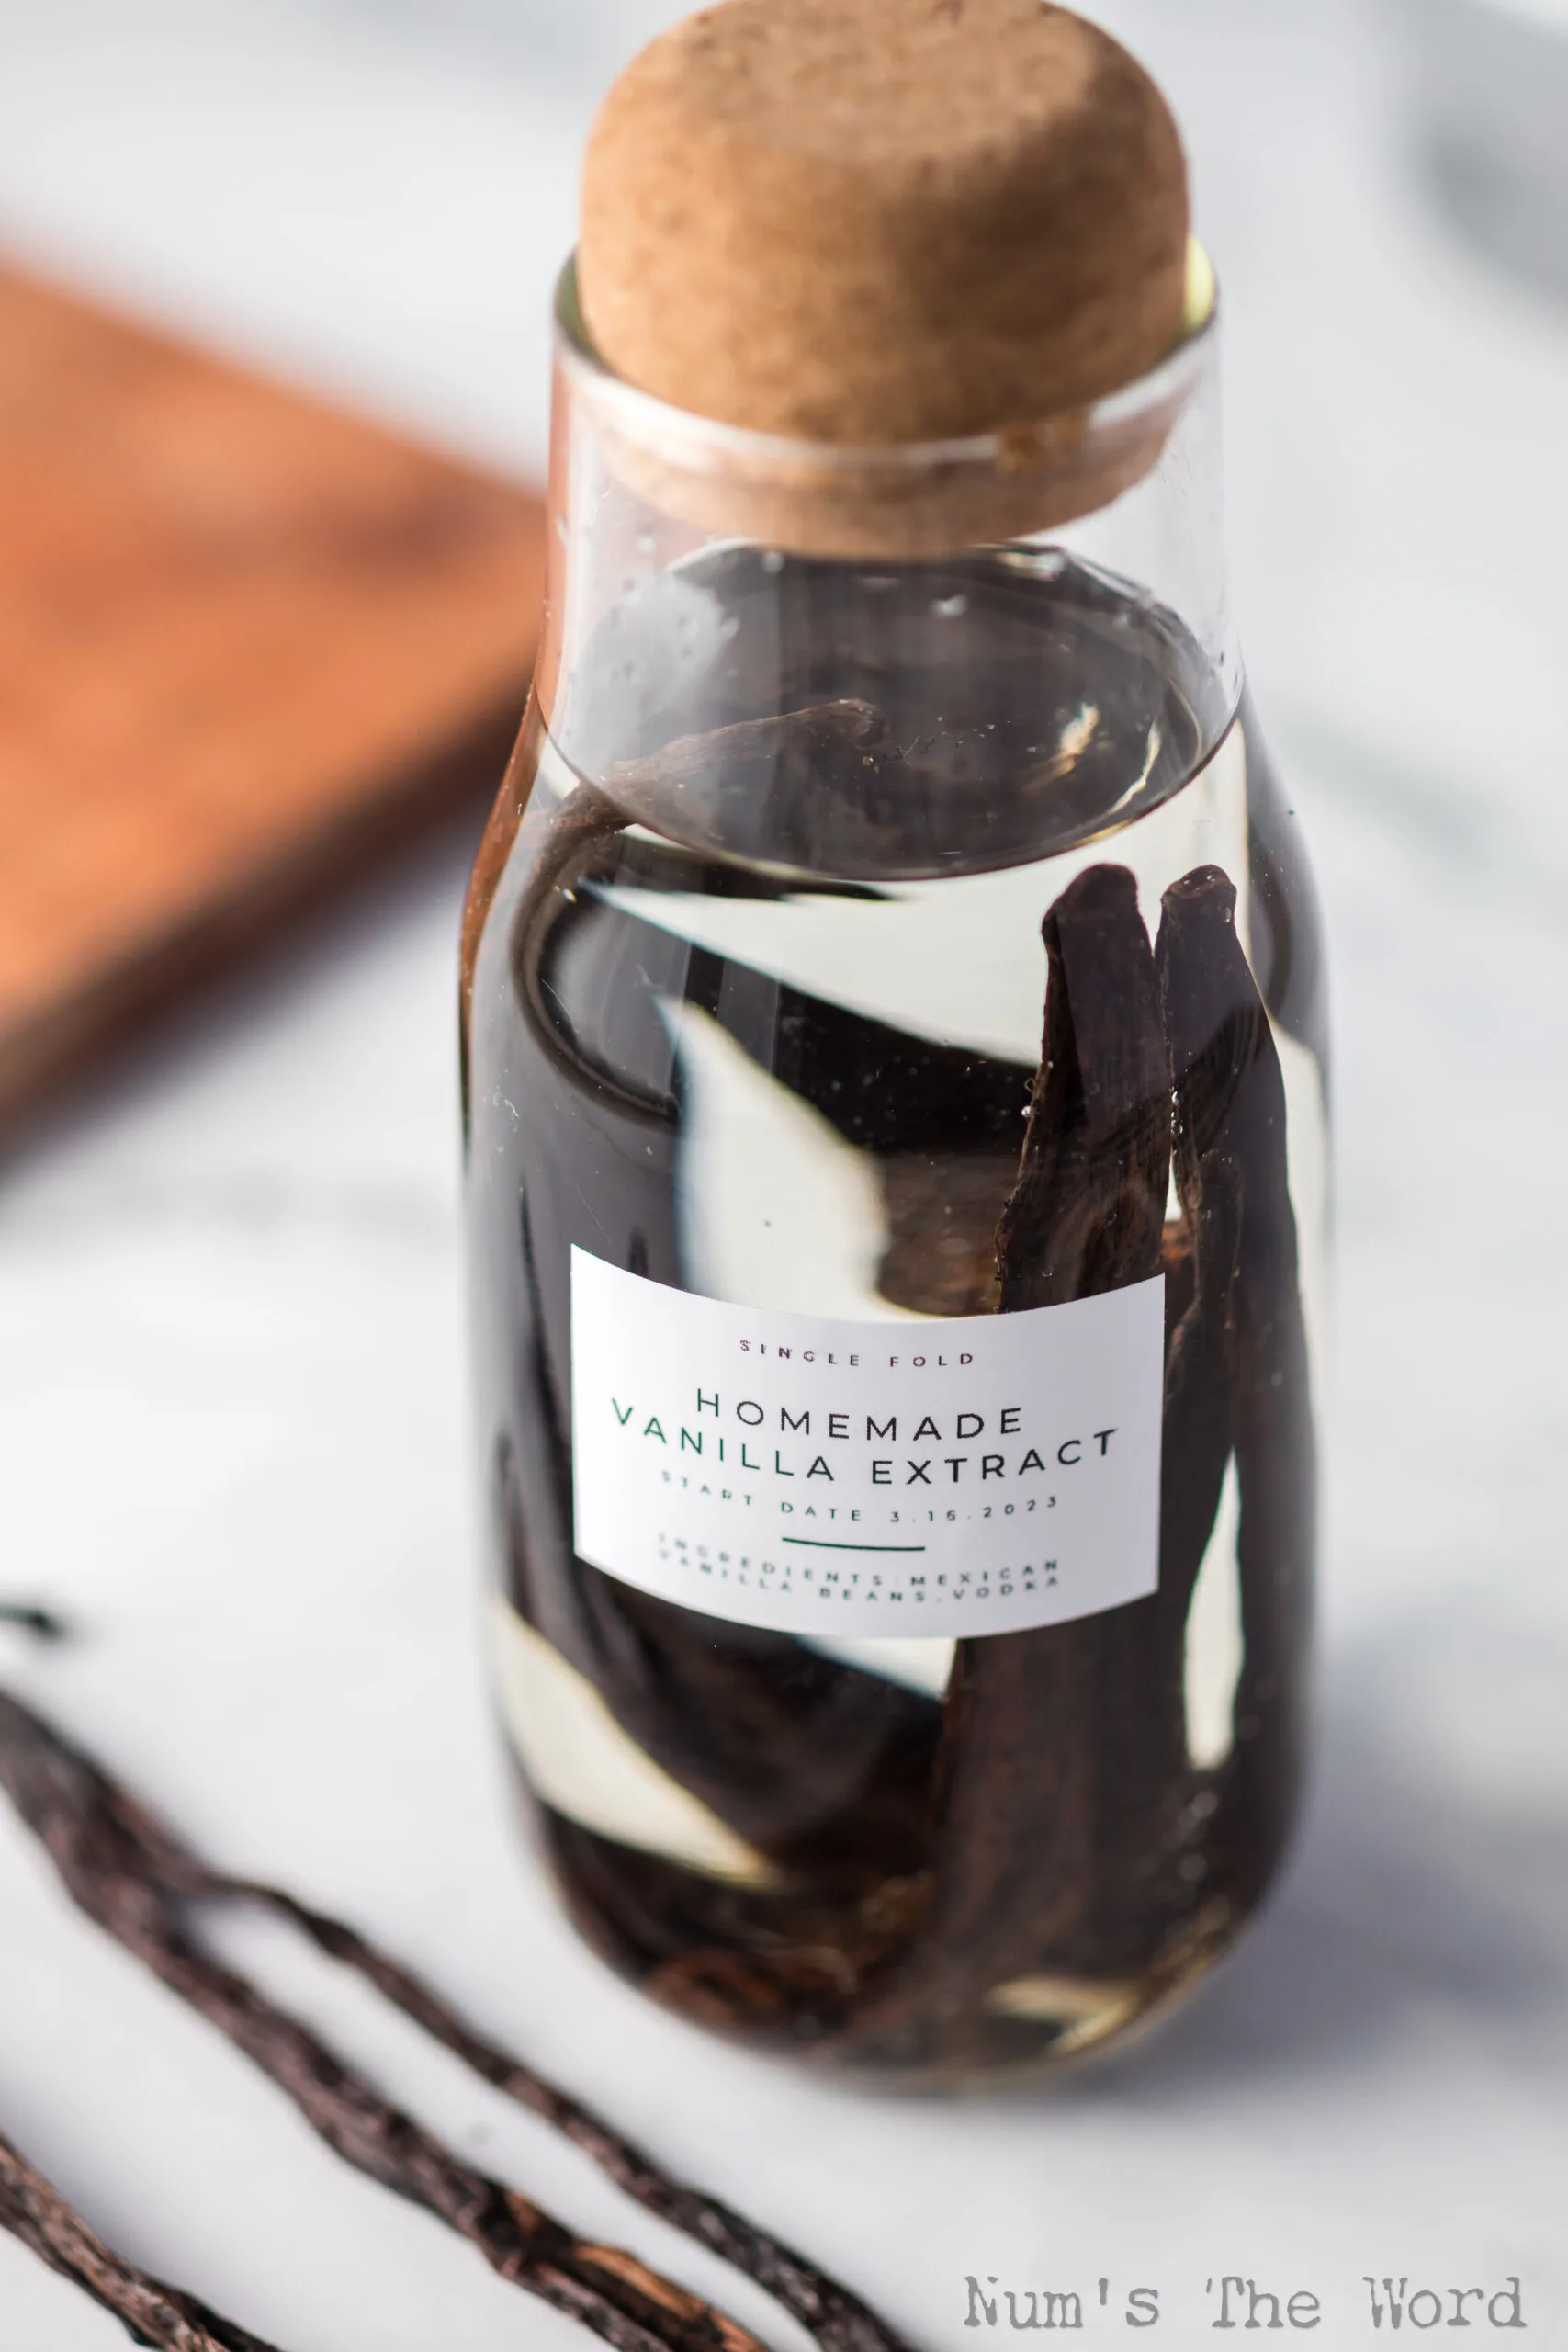 zoomed in image of single fold vanilla extract in bottle